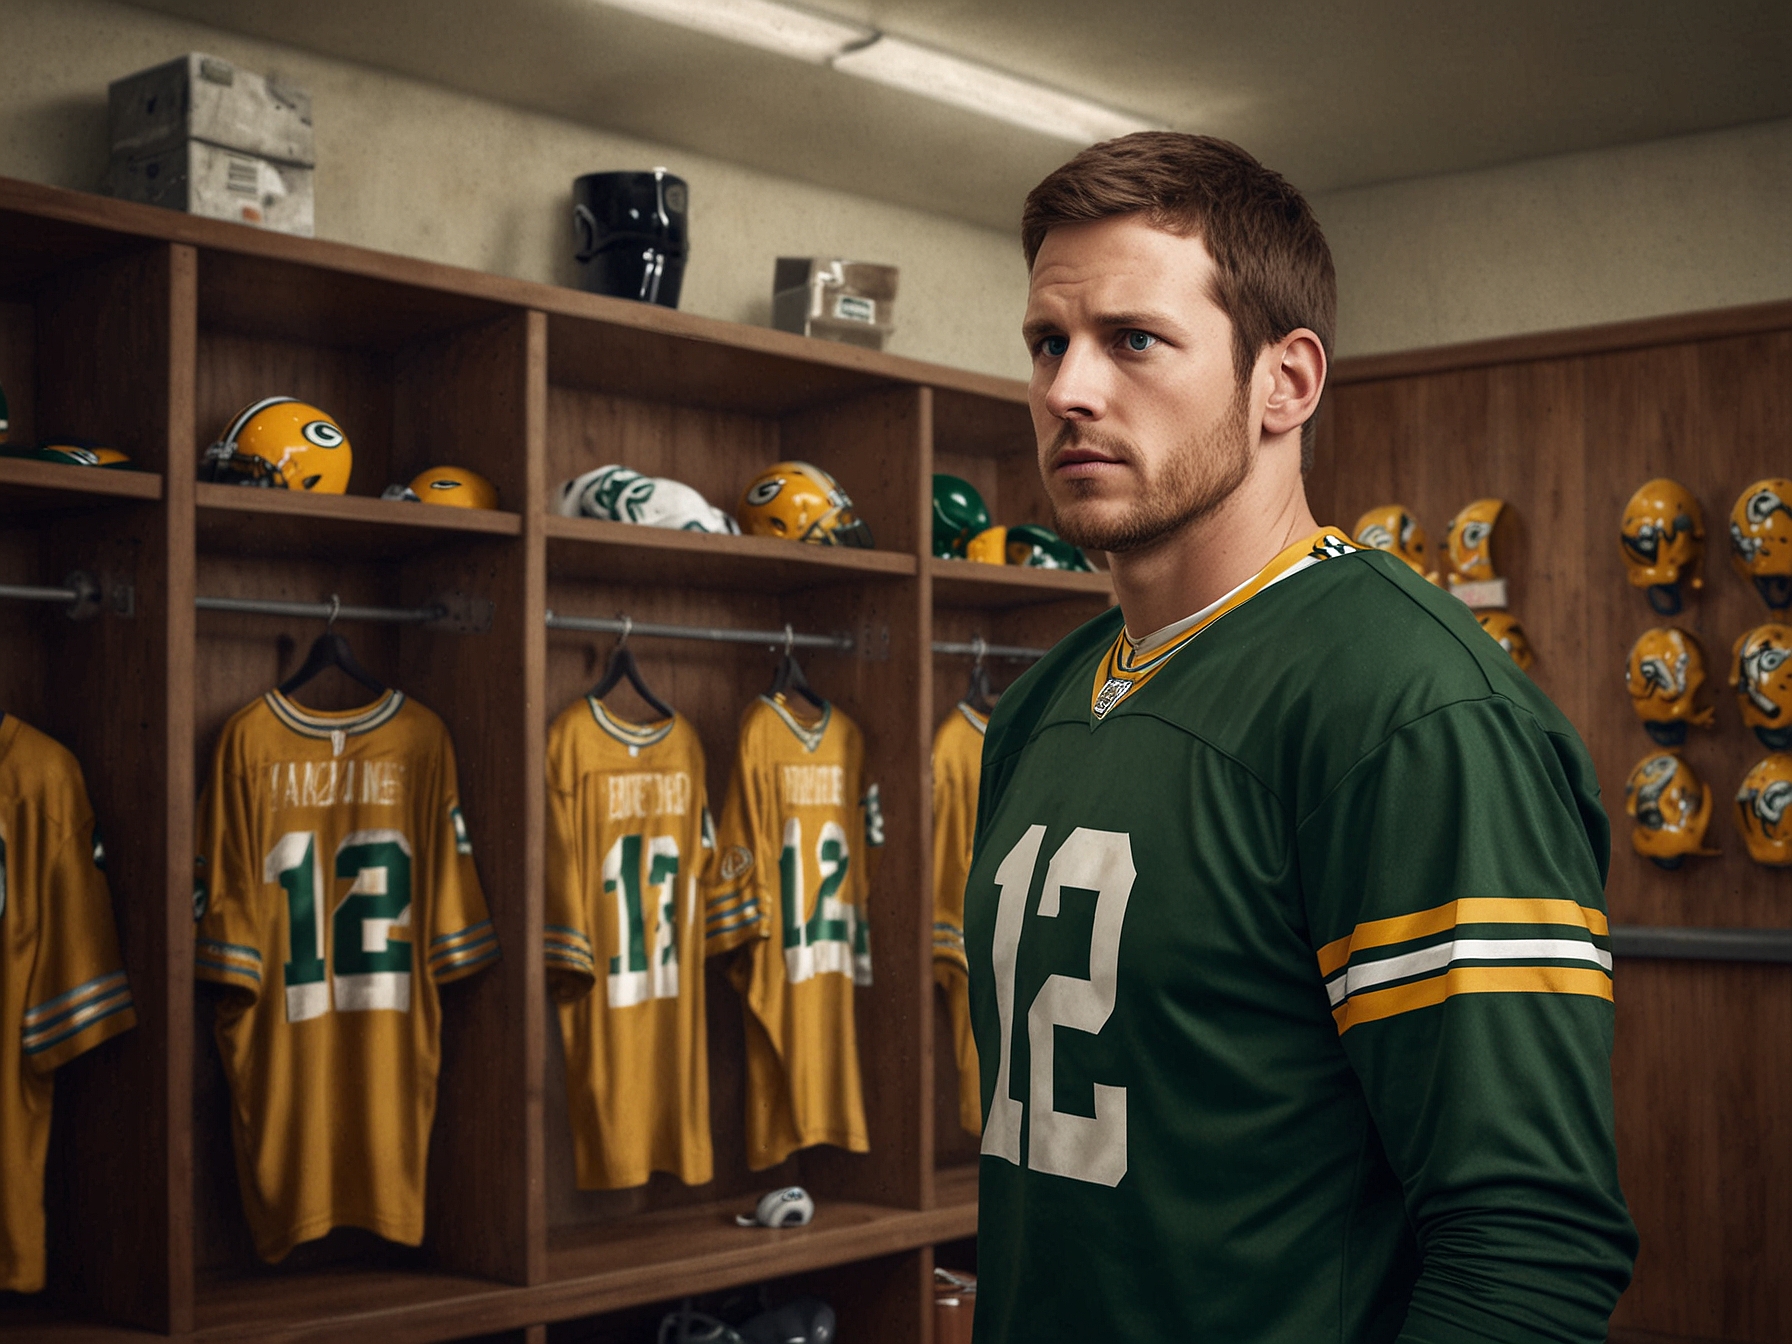 A behind-the-scenes look at the Packers' quarterback in the locker room, highlighting his role in building team morale and camaraderie among teammates.